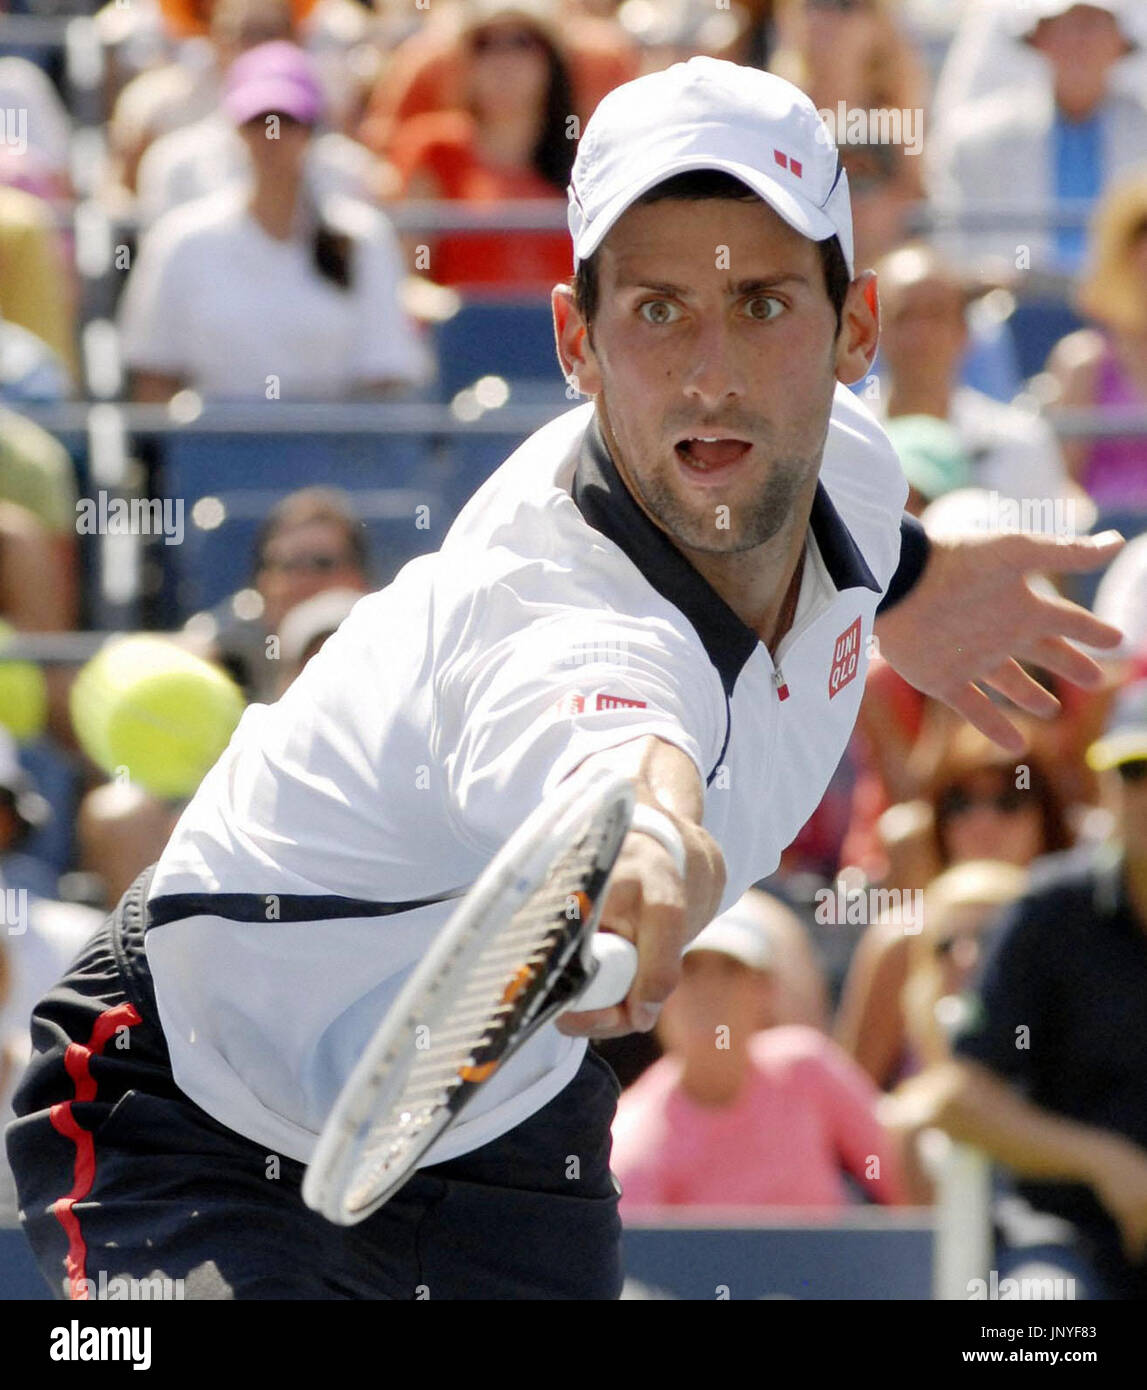 NEW YORK, United States - Serbia's Novak Djokovic plays a shot in his second round men's singles match against Brazil's Rogerio Dutra Silva at the U.S. Open championship in New York on Aug. 31, 2012. Djokovic advanced to the third round. (Kyodo) Stock Photo